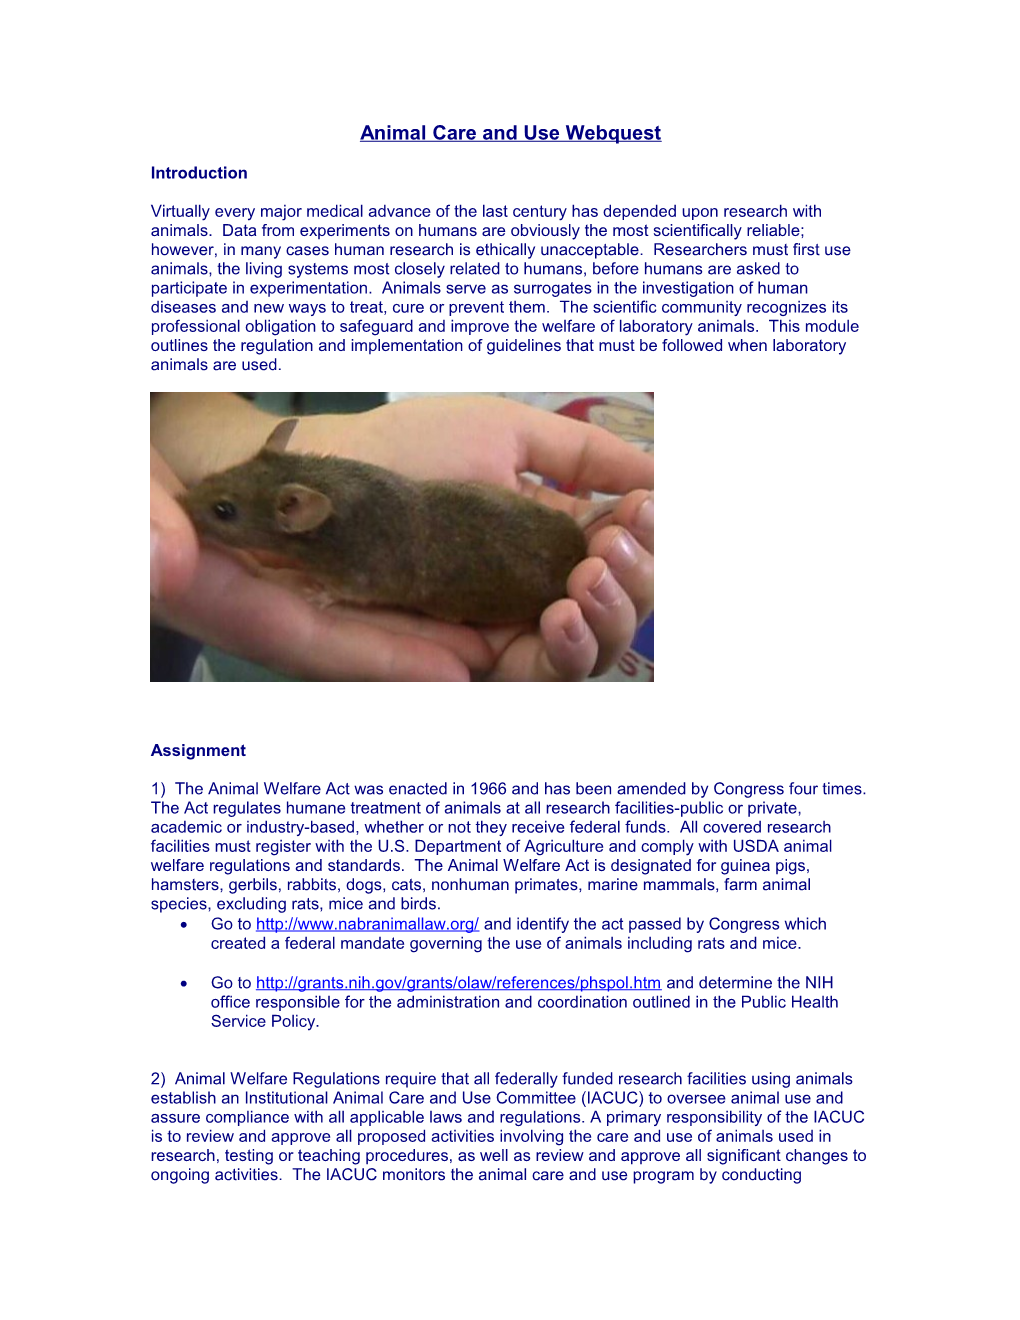 Animal Welfare Regulations Require That All Federally Funded Research Facilities Using